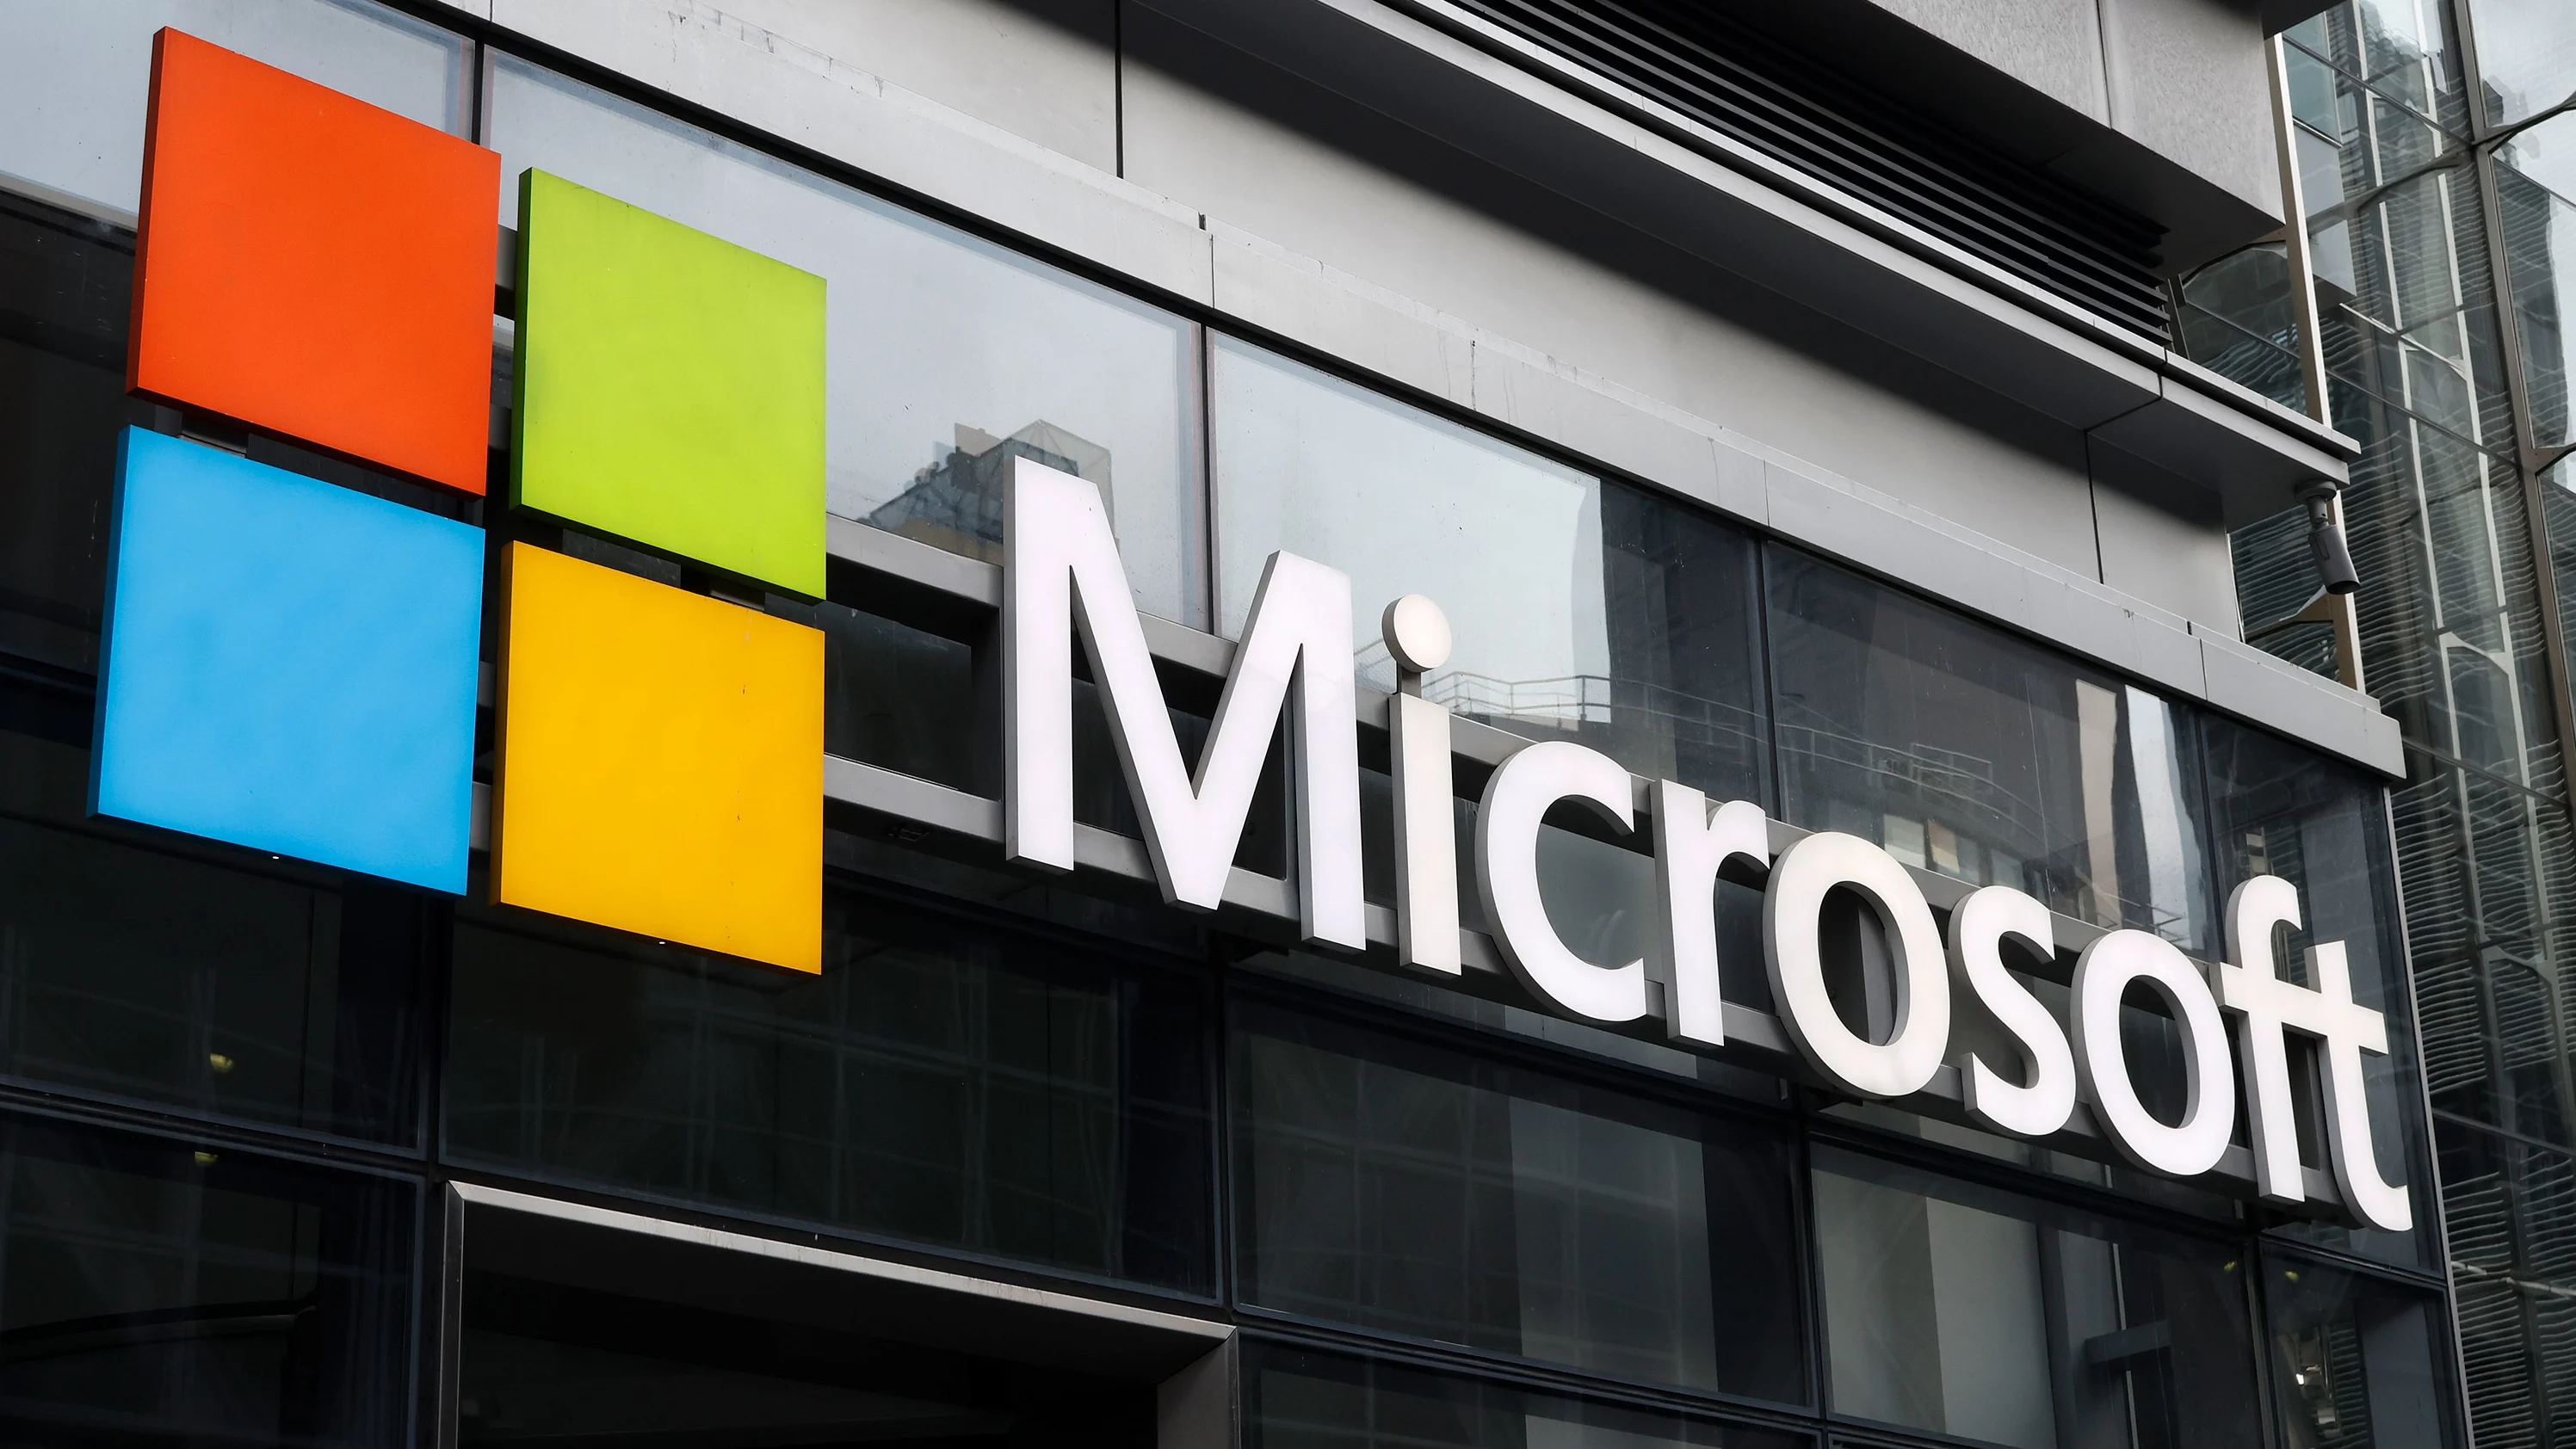 Microsoft said a Russian state-sponsored hacking group gained access to the email accounts of senior leaders [Business]